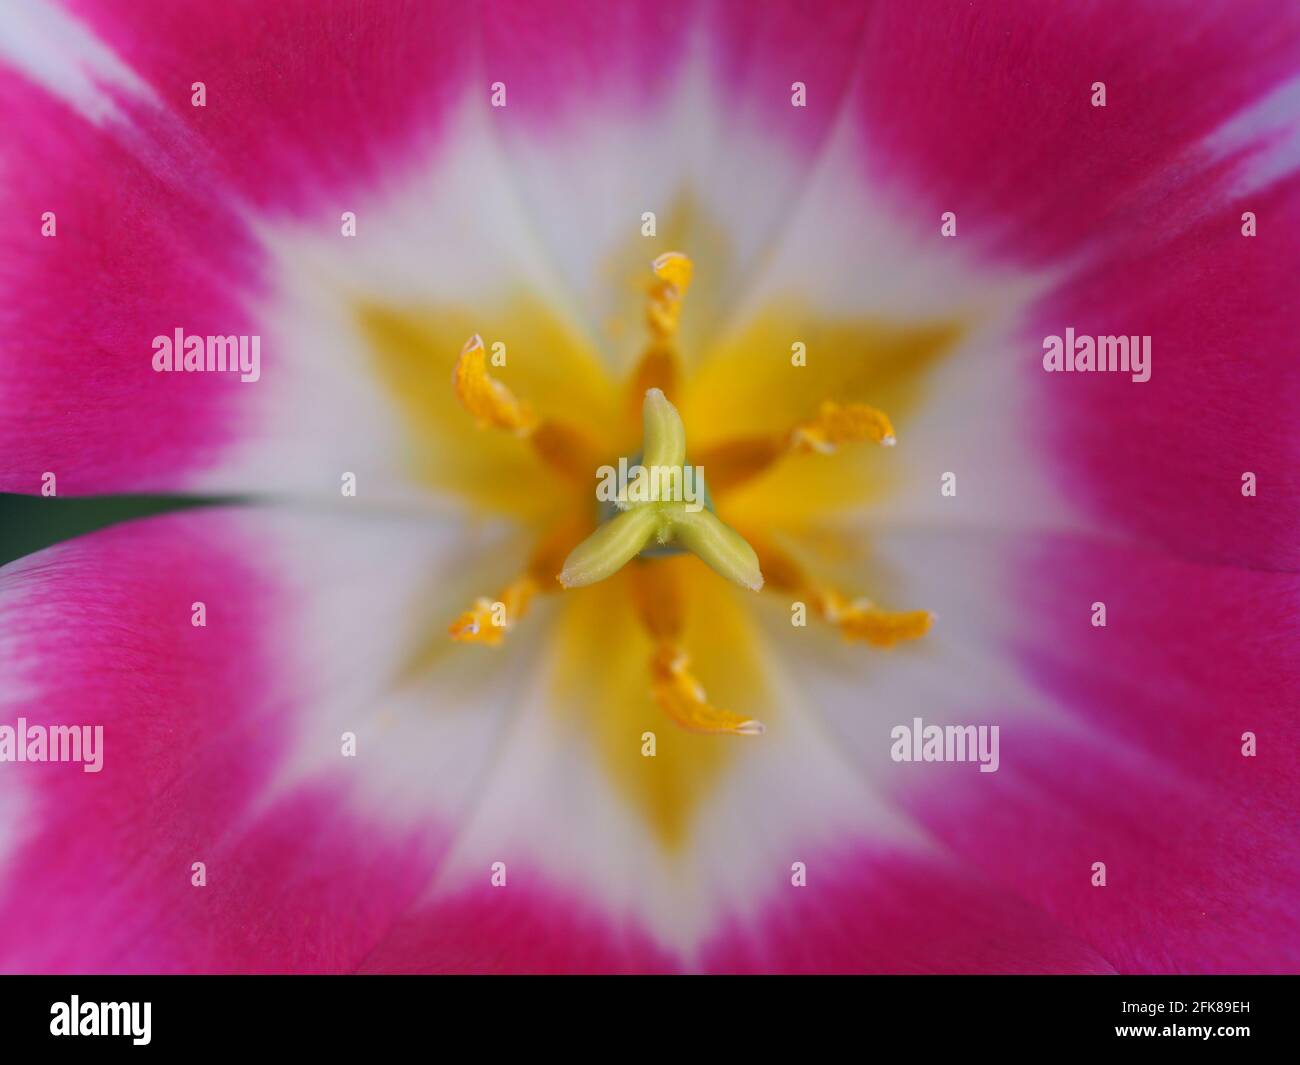 Tulipa 'Ballade'; detail of the pink and white petals and yellow centre of the flower showing the art of nature. Stock Photo